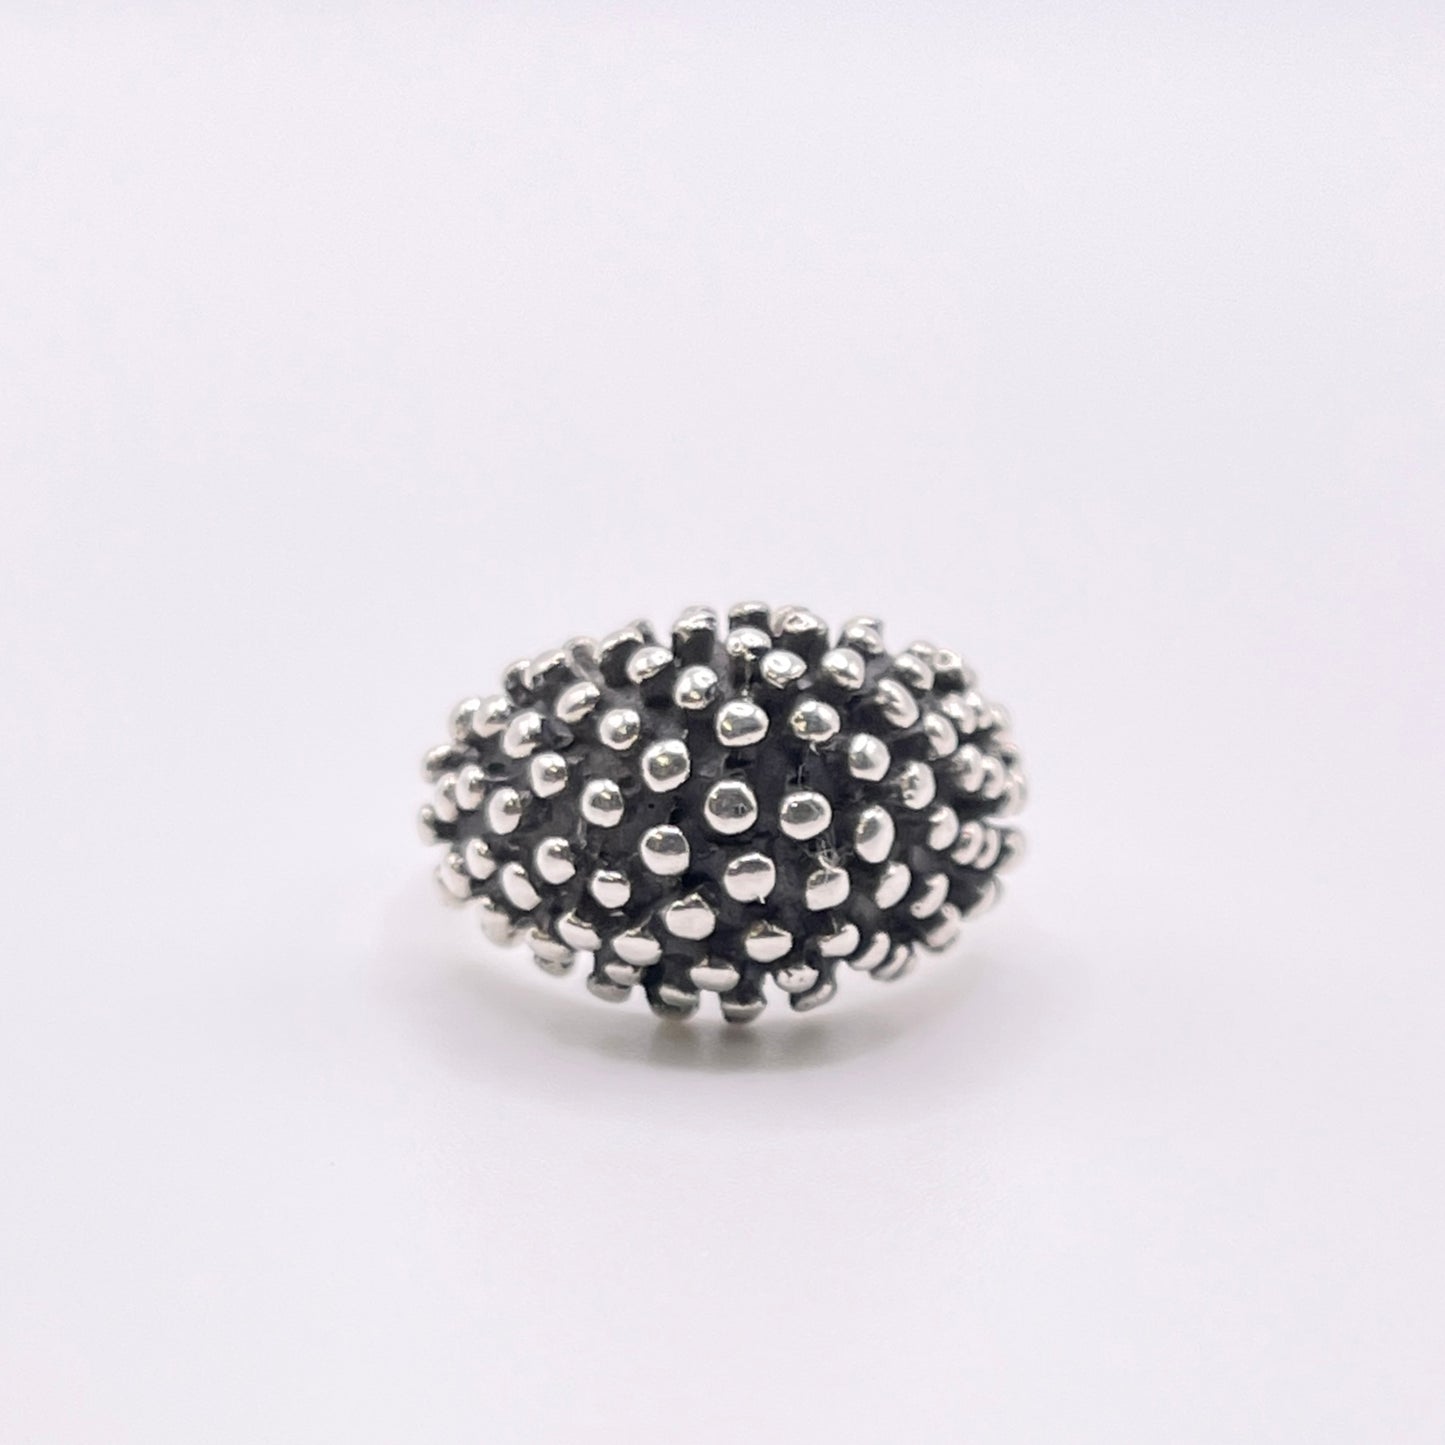 Spotted Crown Cocktail Ring